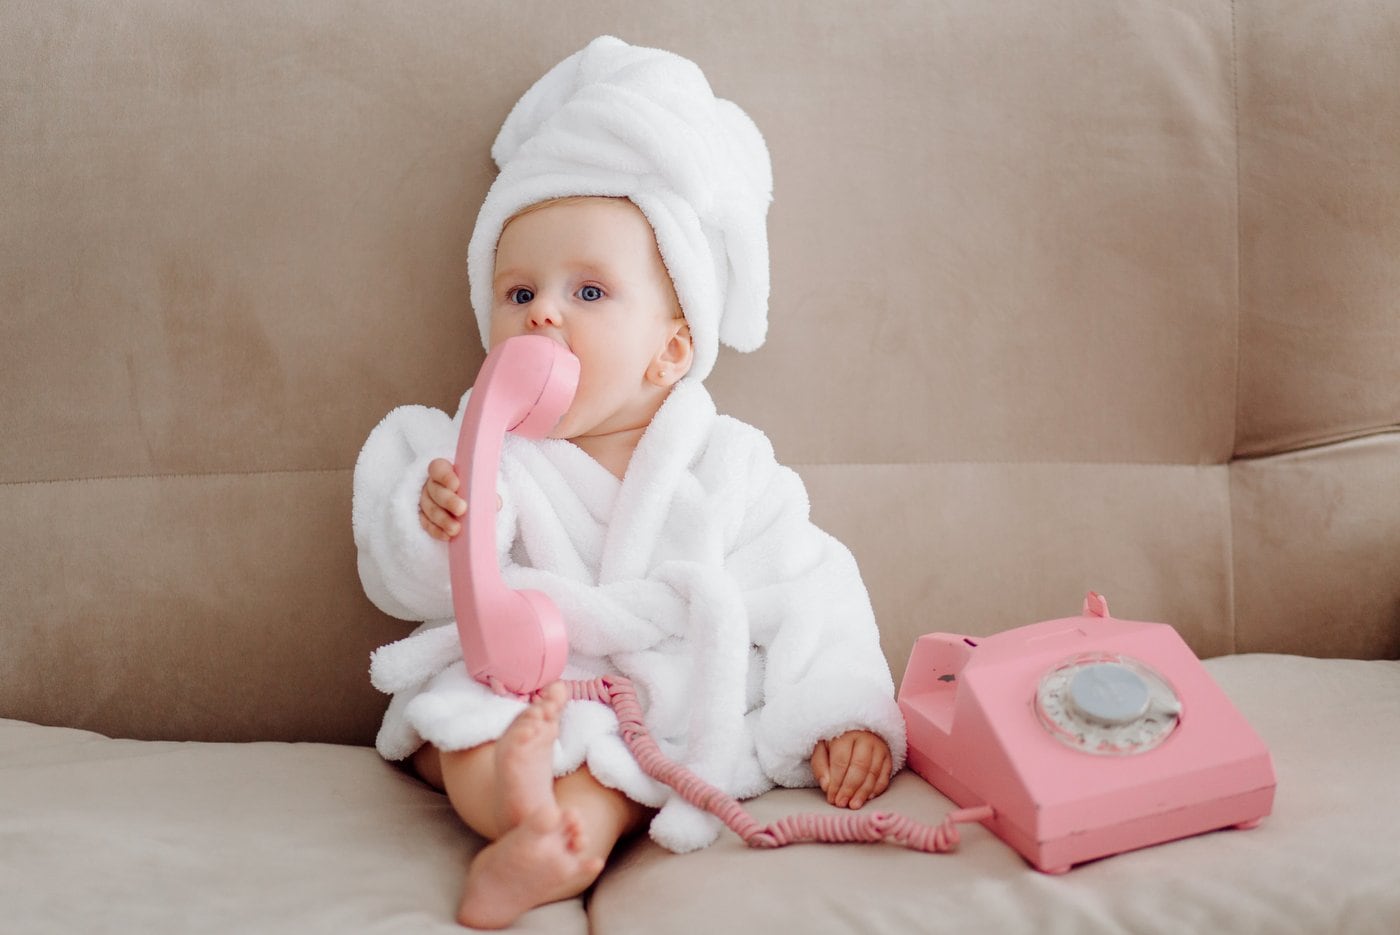 Cute baby playing with a pink vintage phone toy